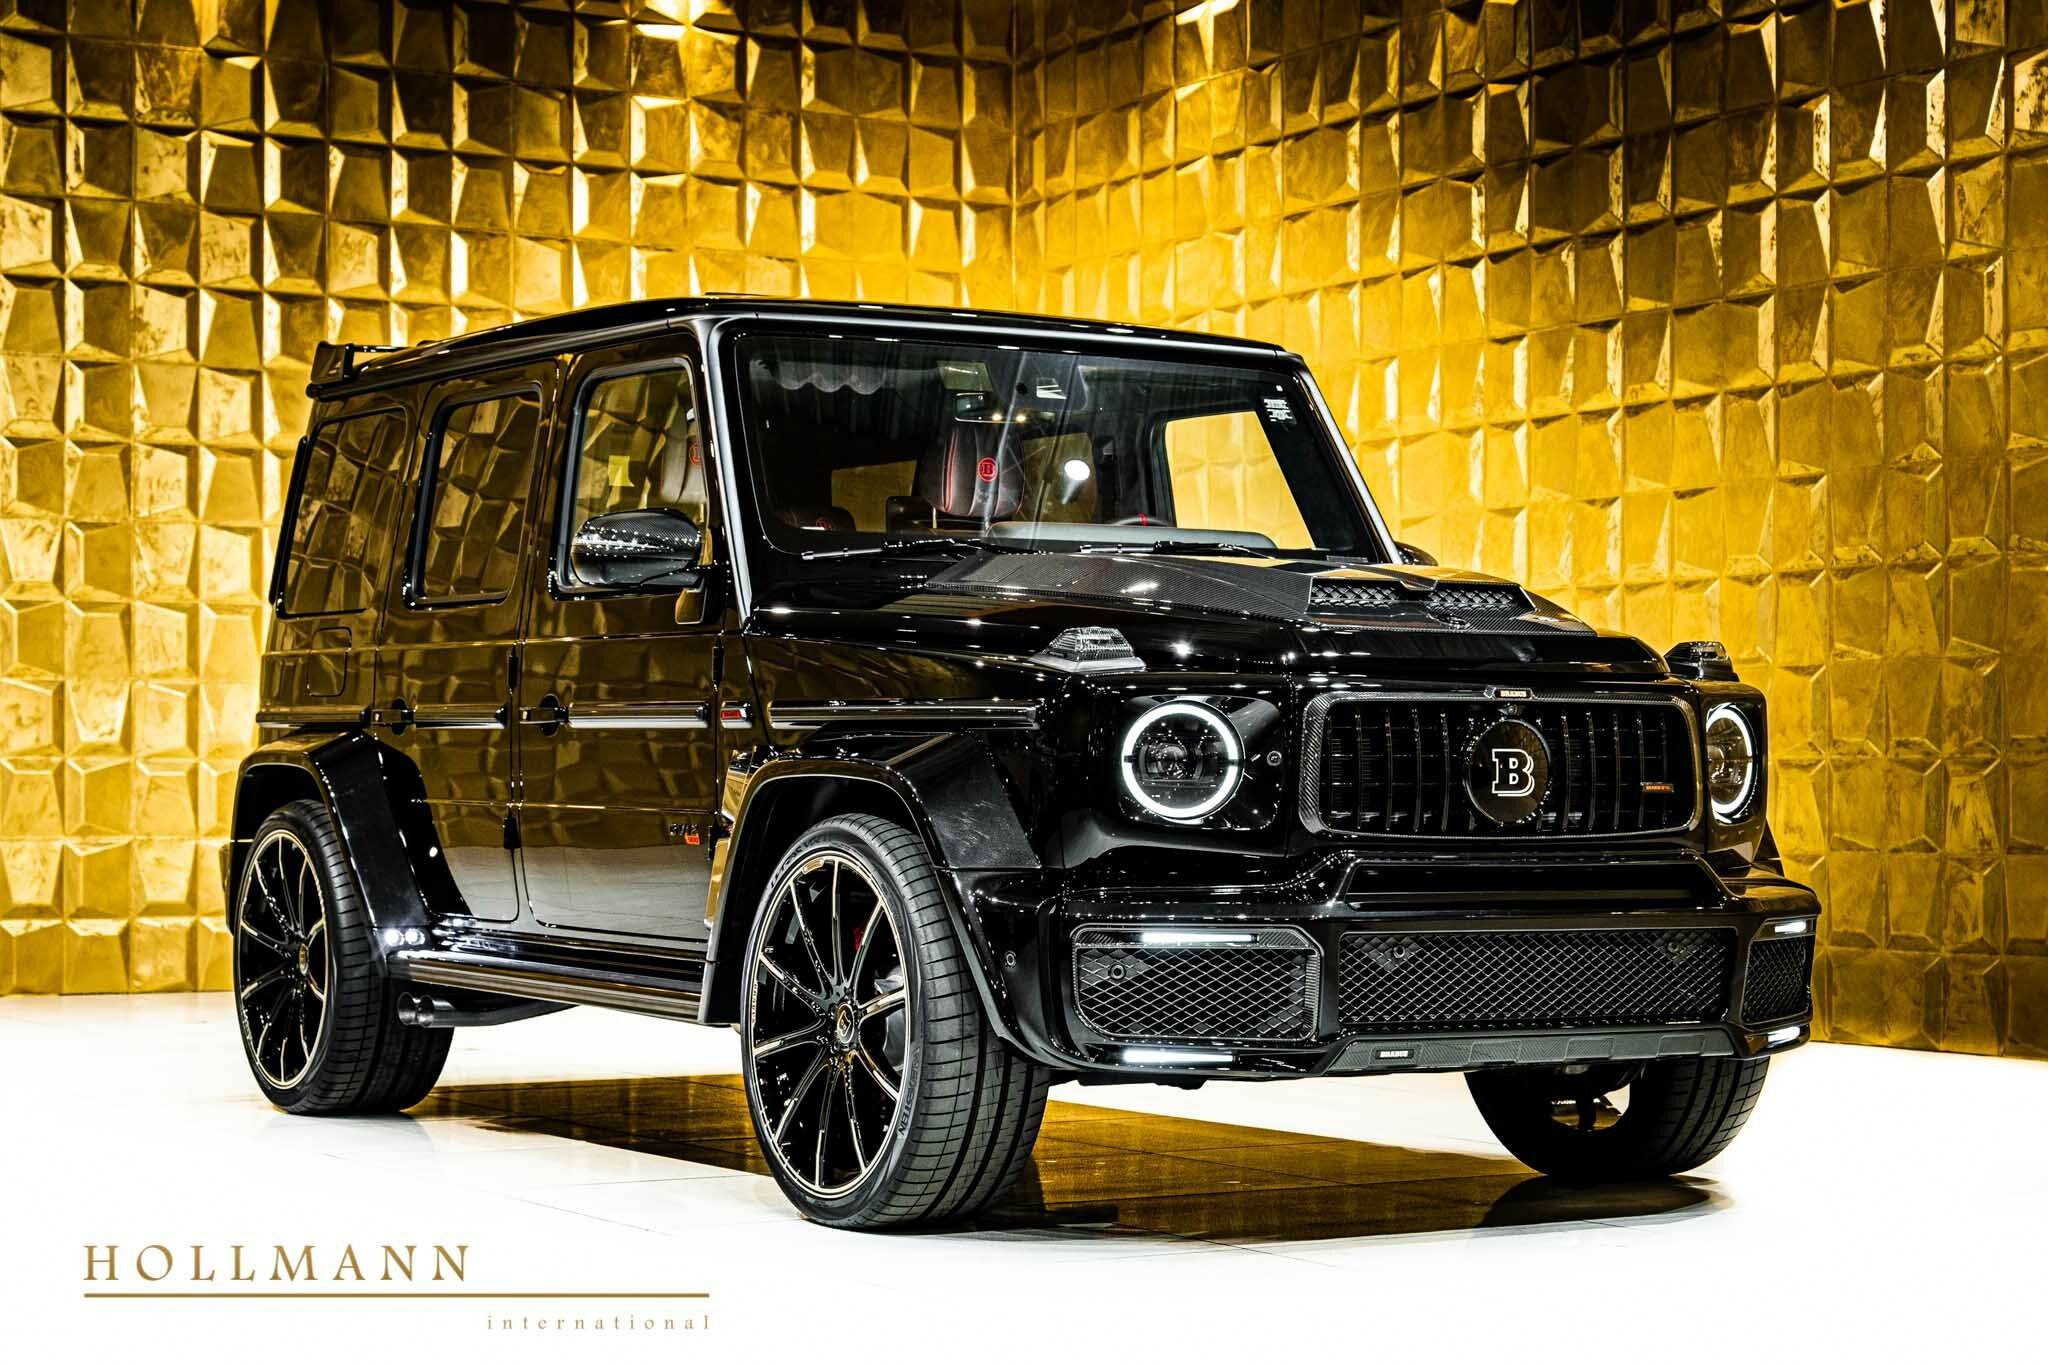 This Brabus-Tuned Mercedes G-Class Could Be Yours, if You Sell